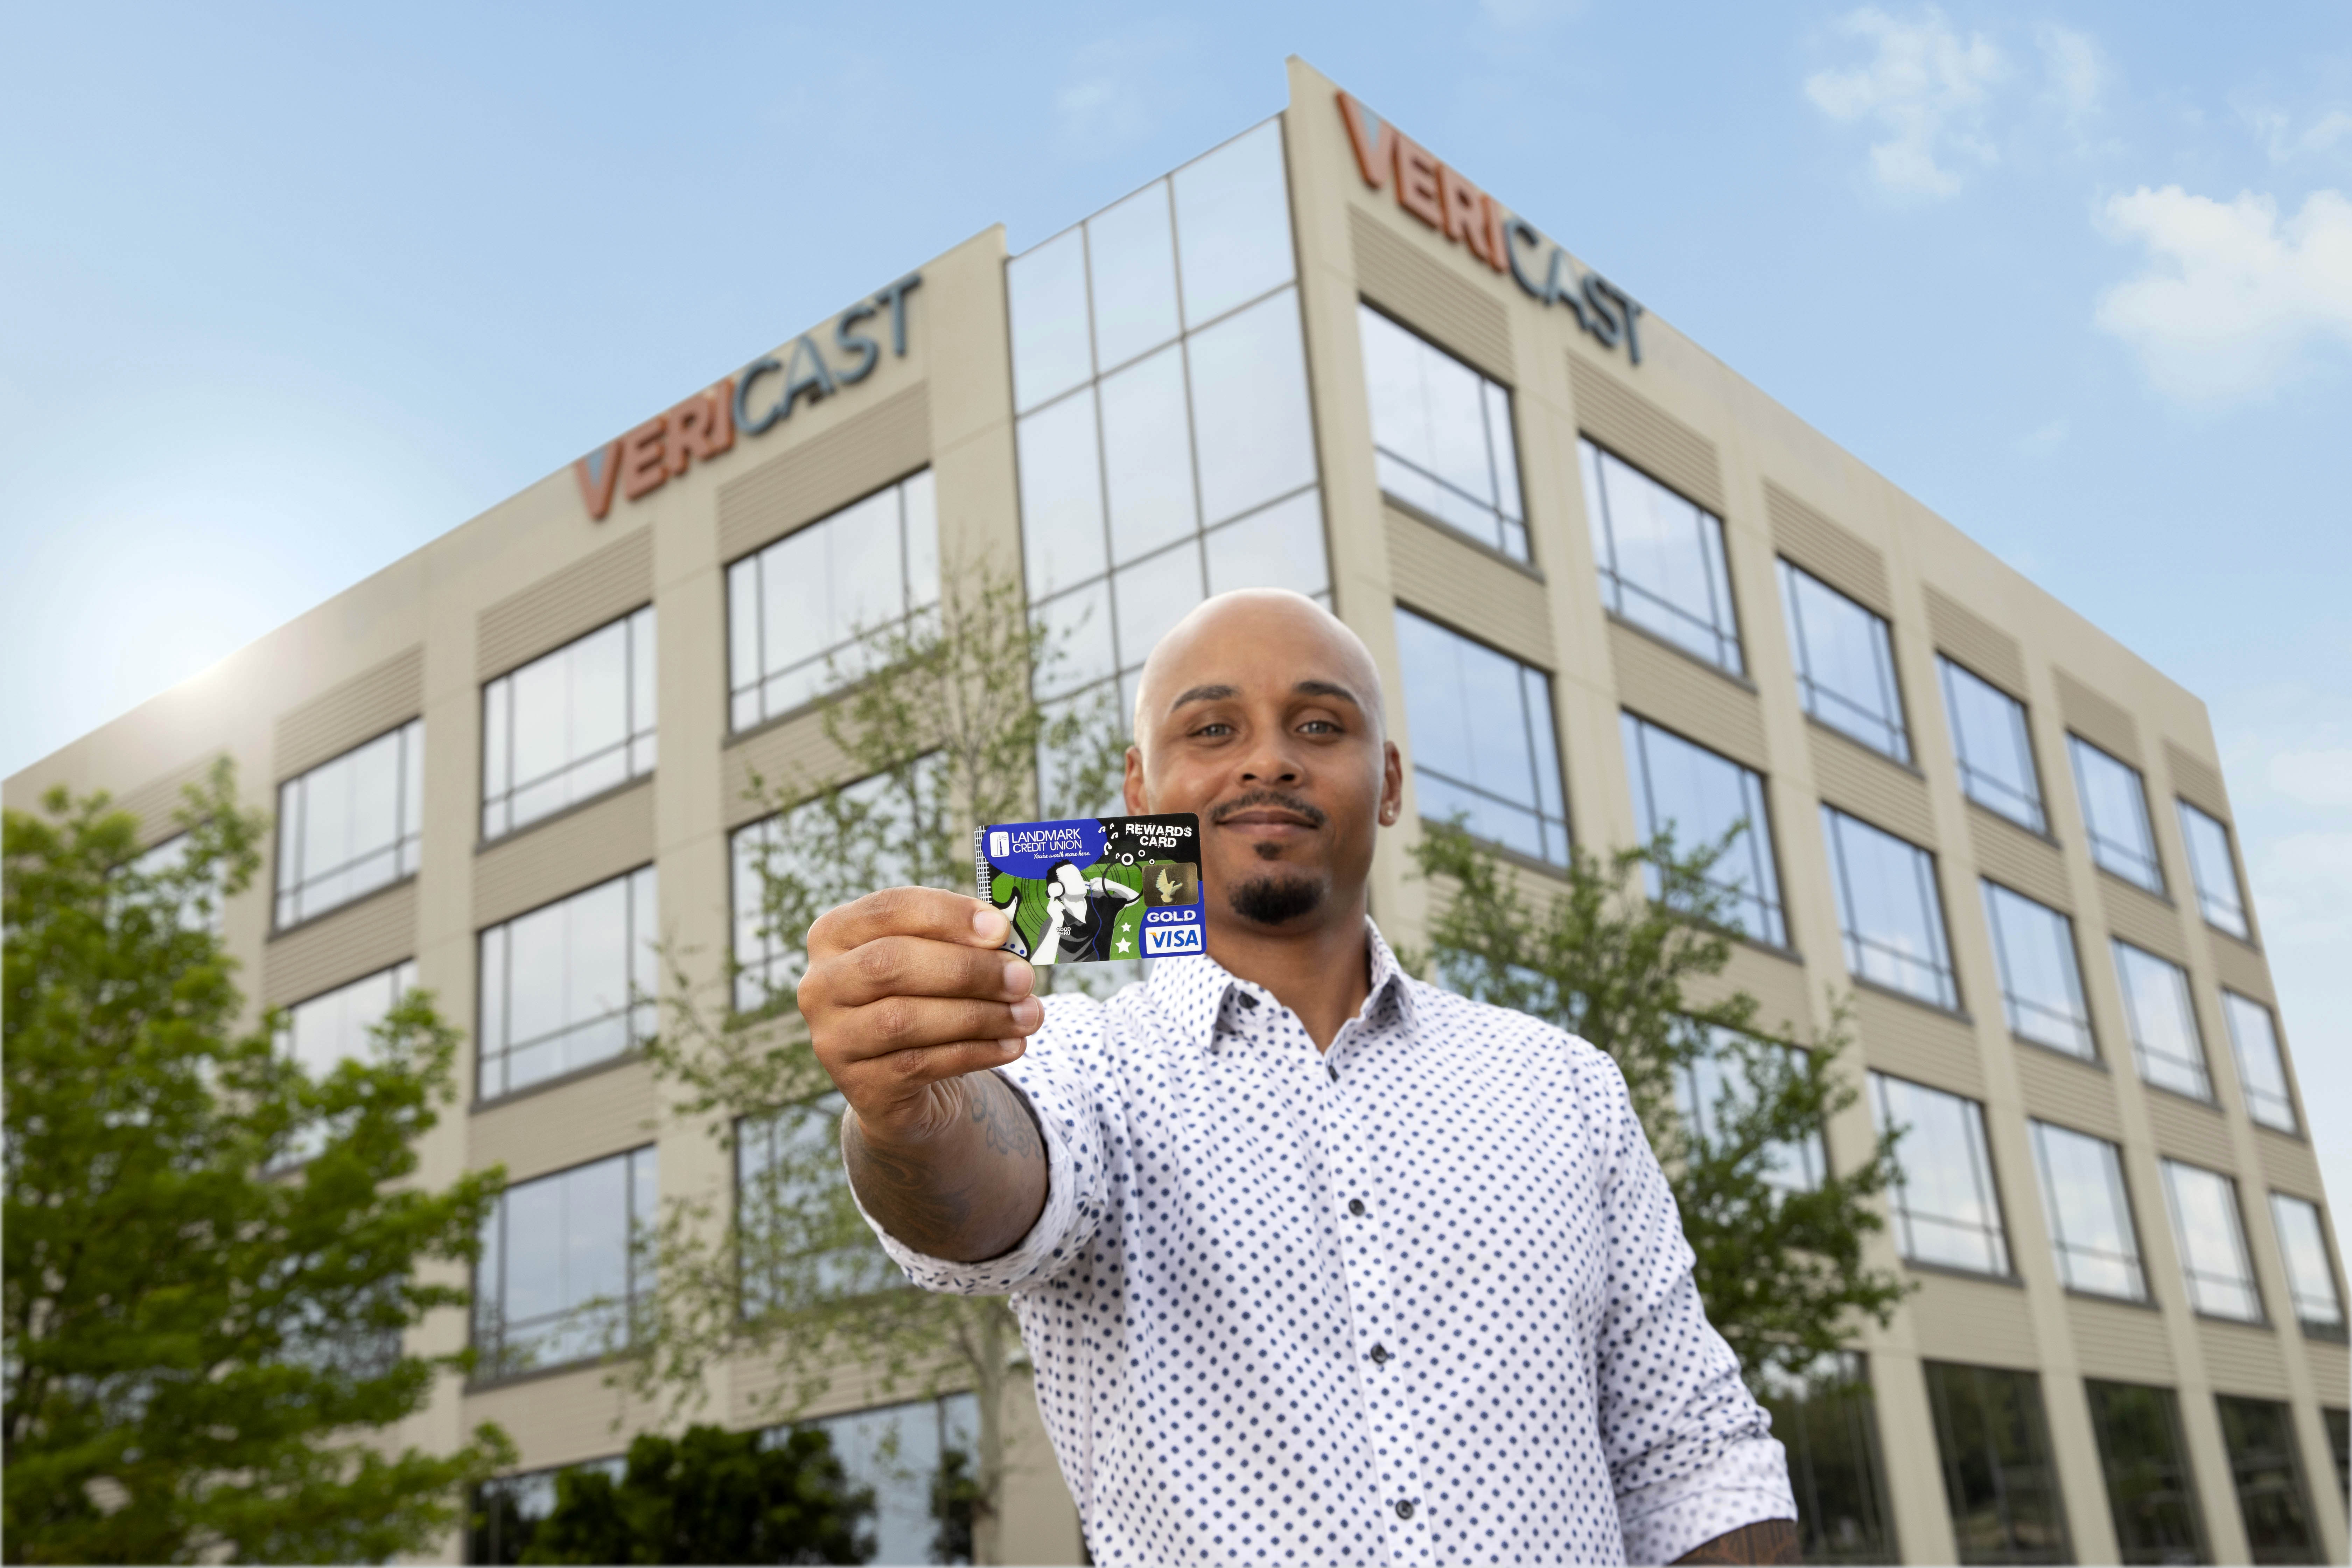 Josh Hatcher displays customized payments card in front of Vericast building